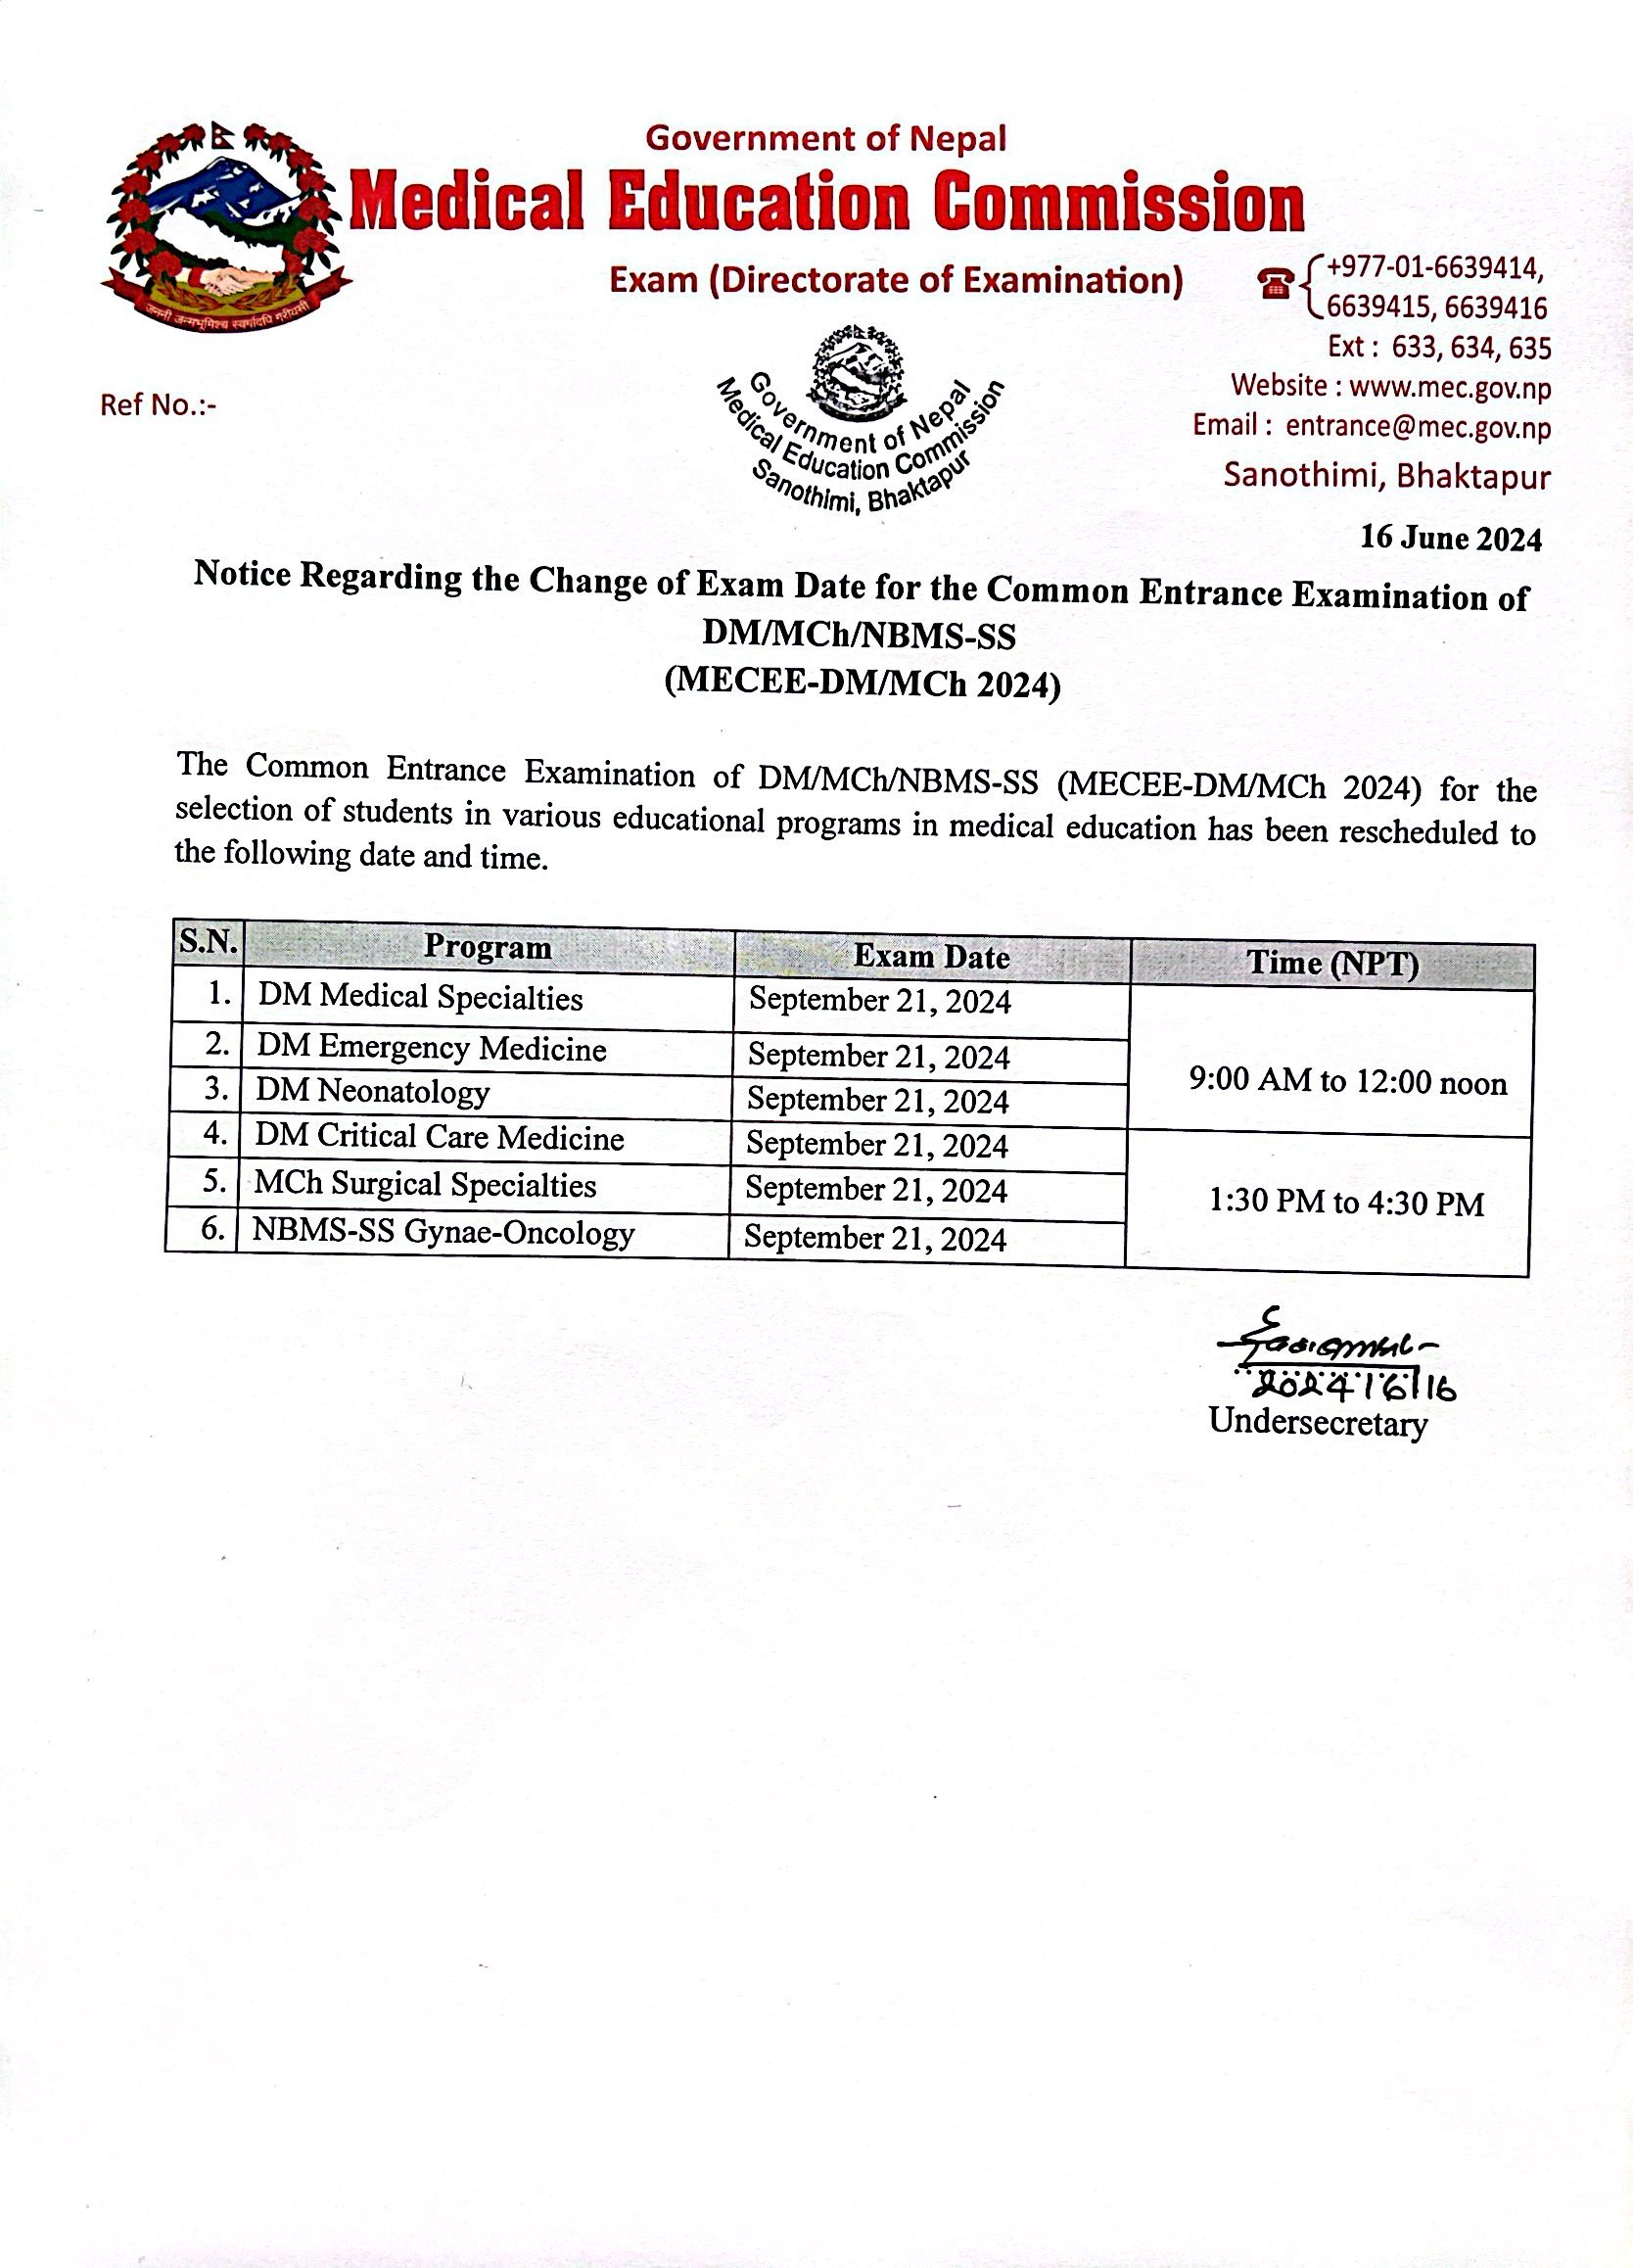 Notice Regarding the Change of Exam Date for the Common Entrance Examination of  DM/MCh/NBMS-SS (MECEE-DM/MCh 2024)